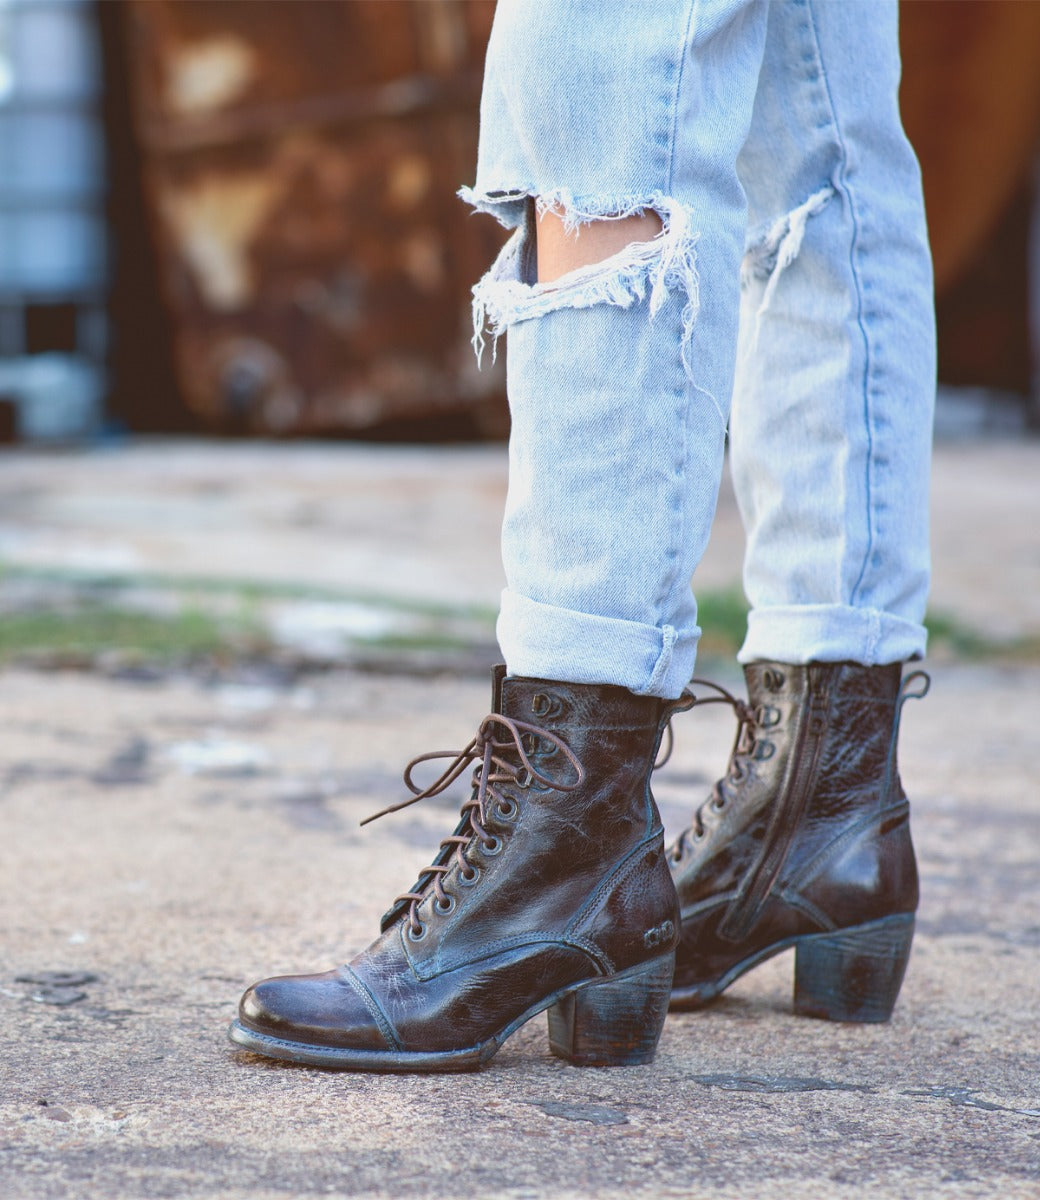 A woman wearing Bed Stu distressed jeans and Bed Stu lace up boots.